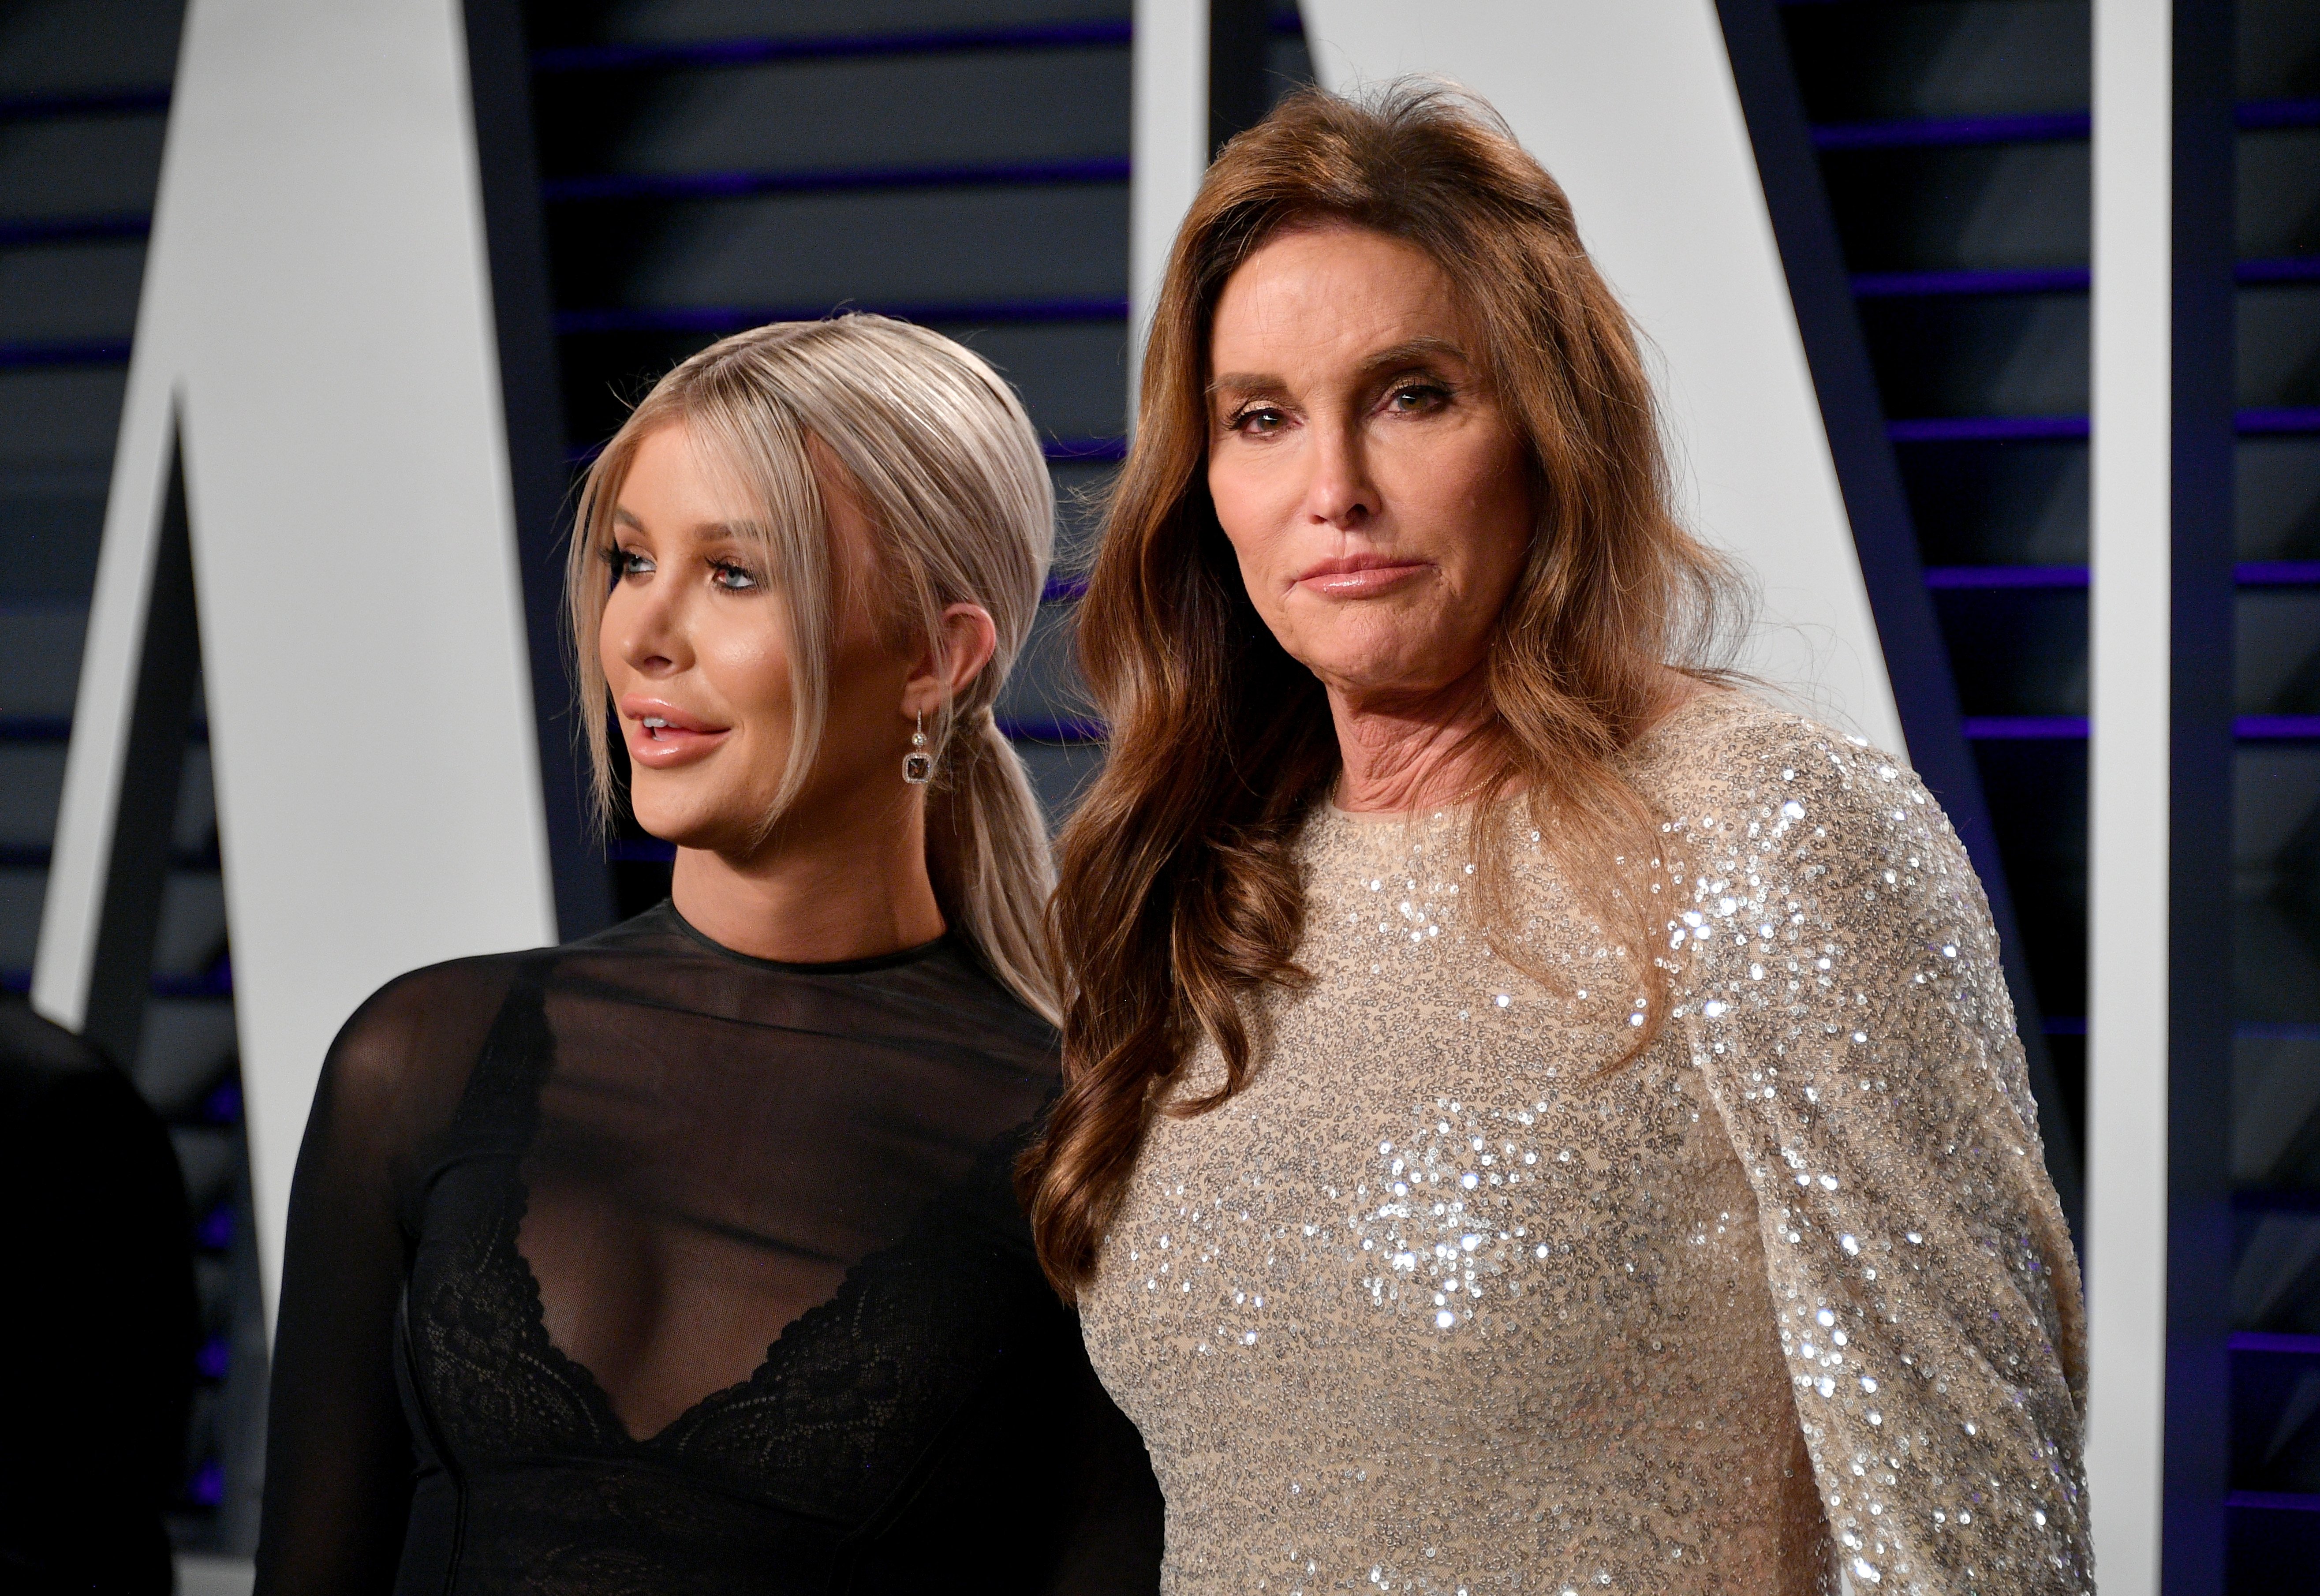 Sophia Hutchins and Caitlyn Jenner attend the 2019 Vanity Fair Oscar Party on February 24, 2019 in Beverly Hills, California | Photo: GettyImages